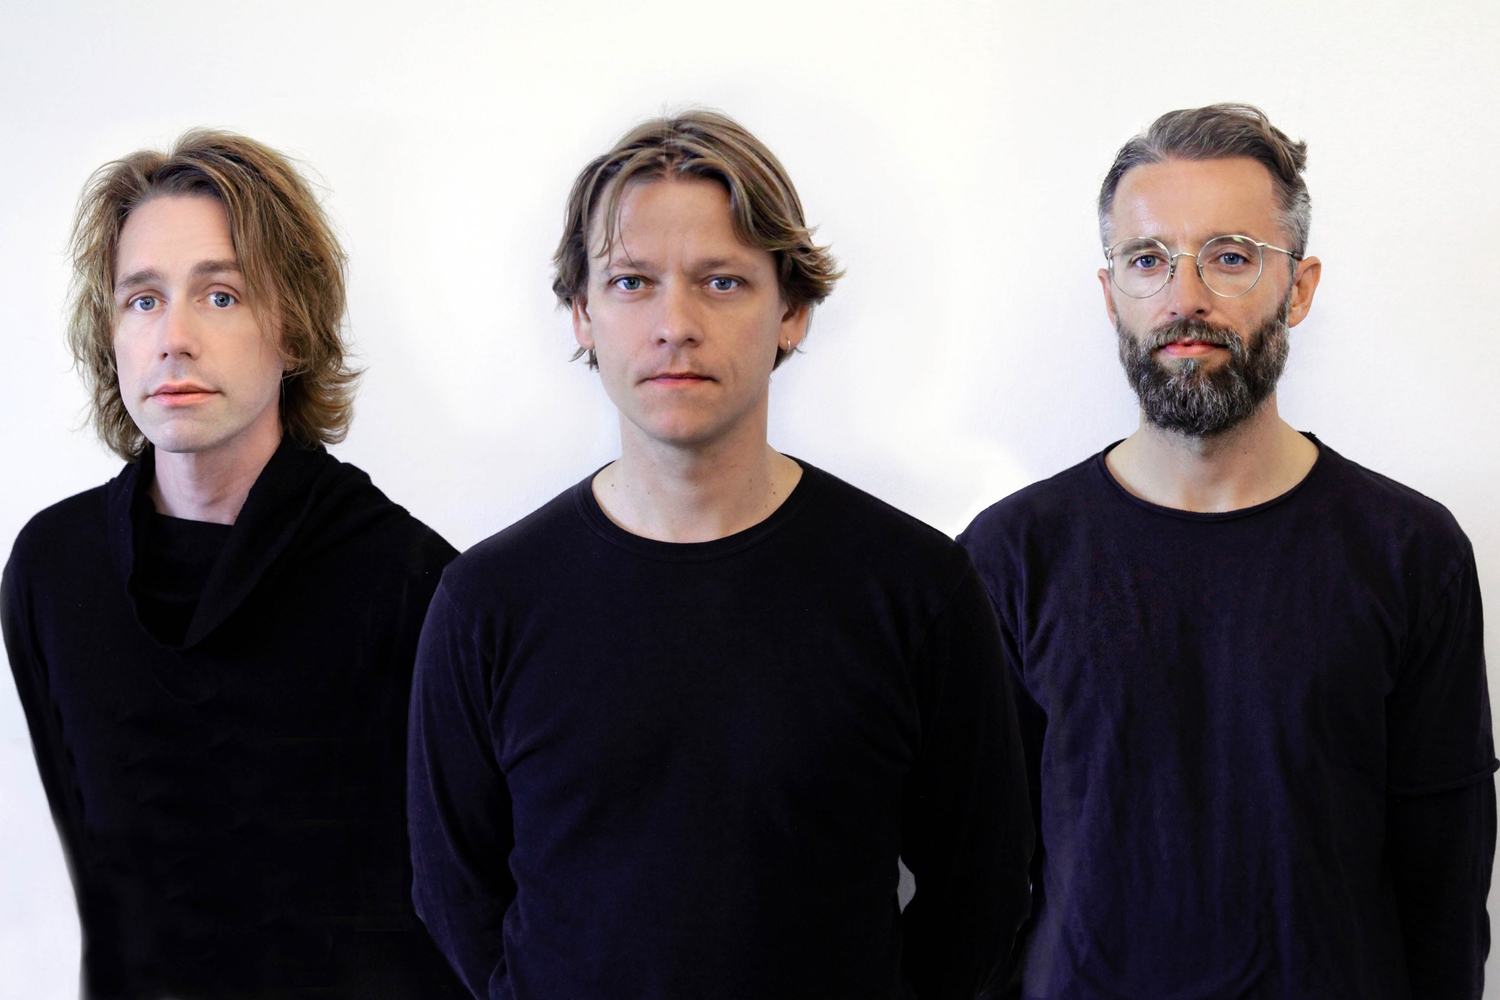 Mew to release new album ‘Visuals’ in April